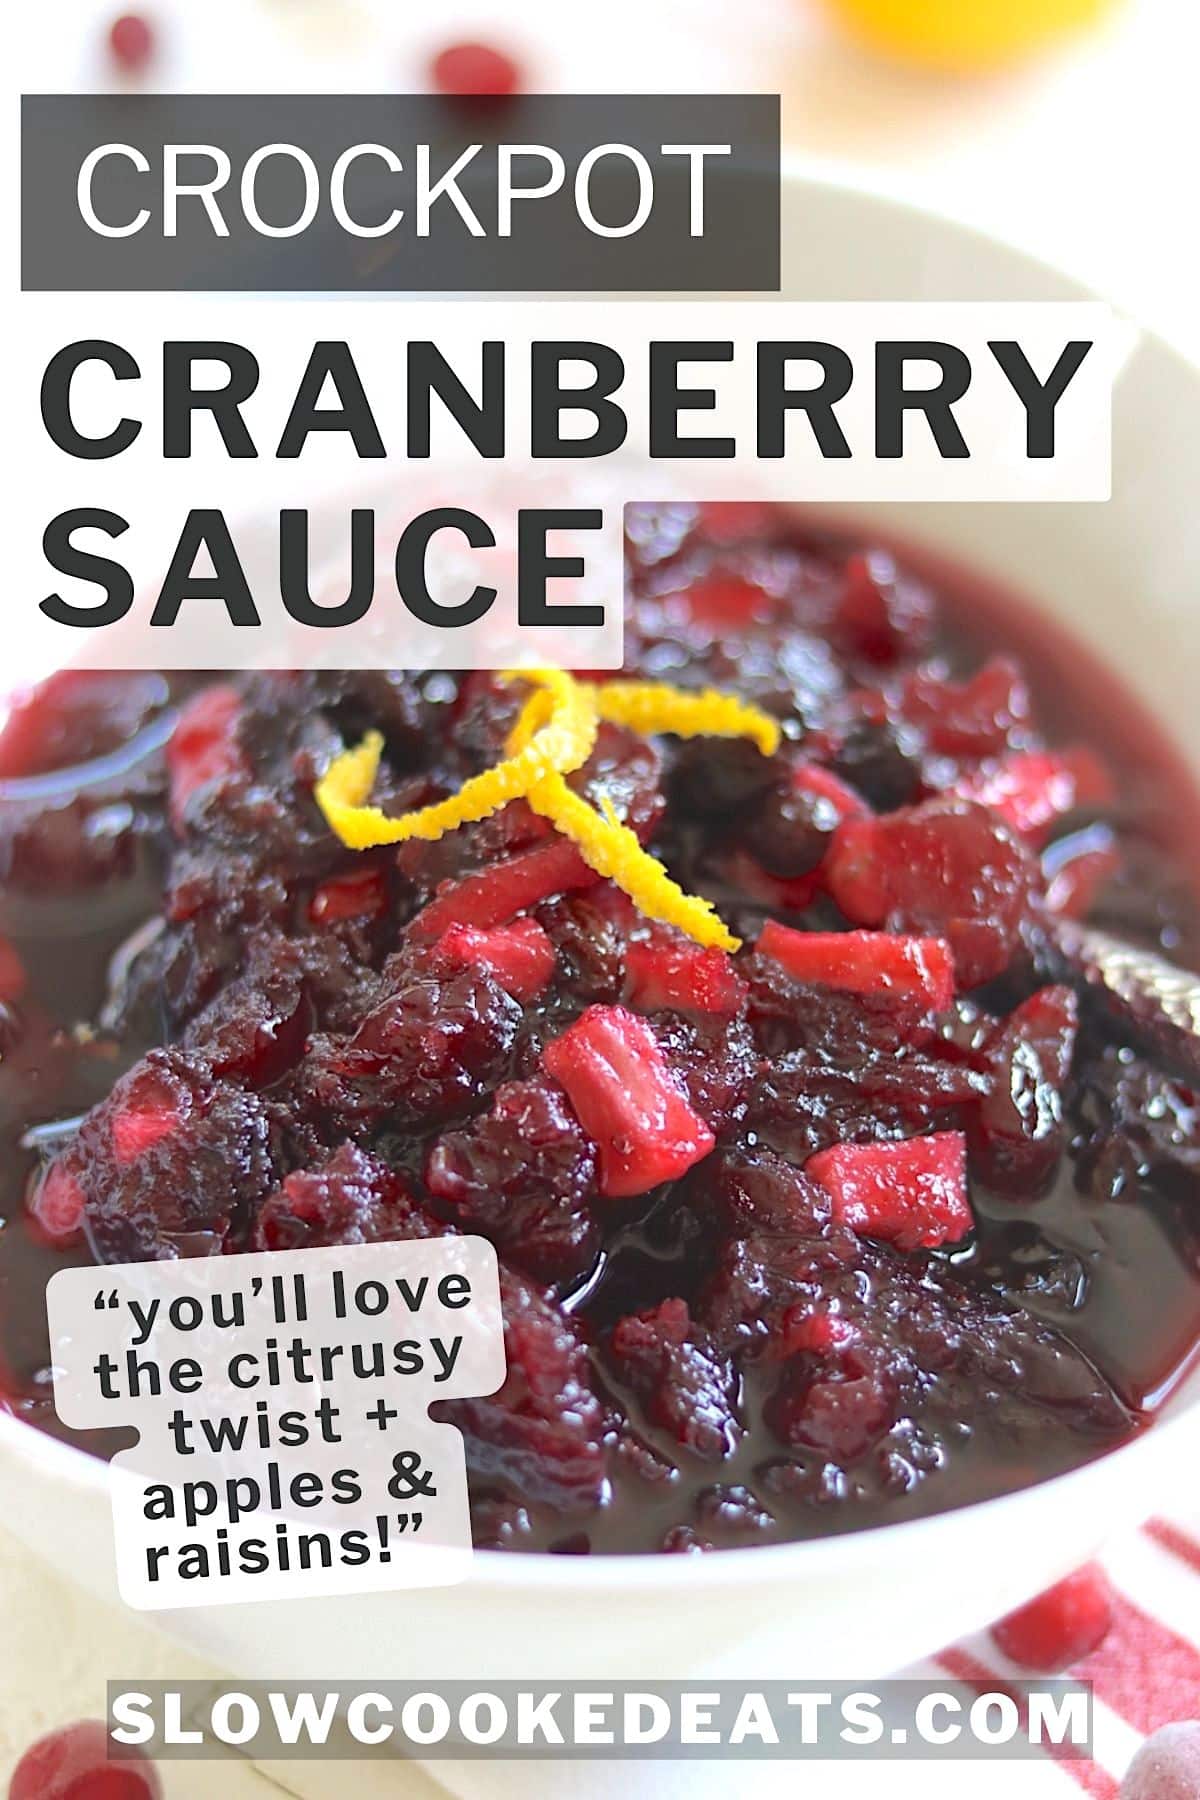 Crockpot cranberry sauce served in a white bowl and garnished with orange zest.